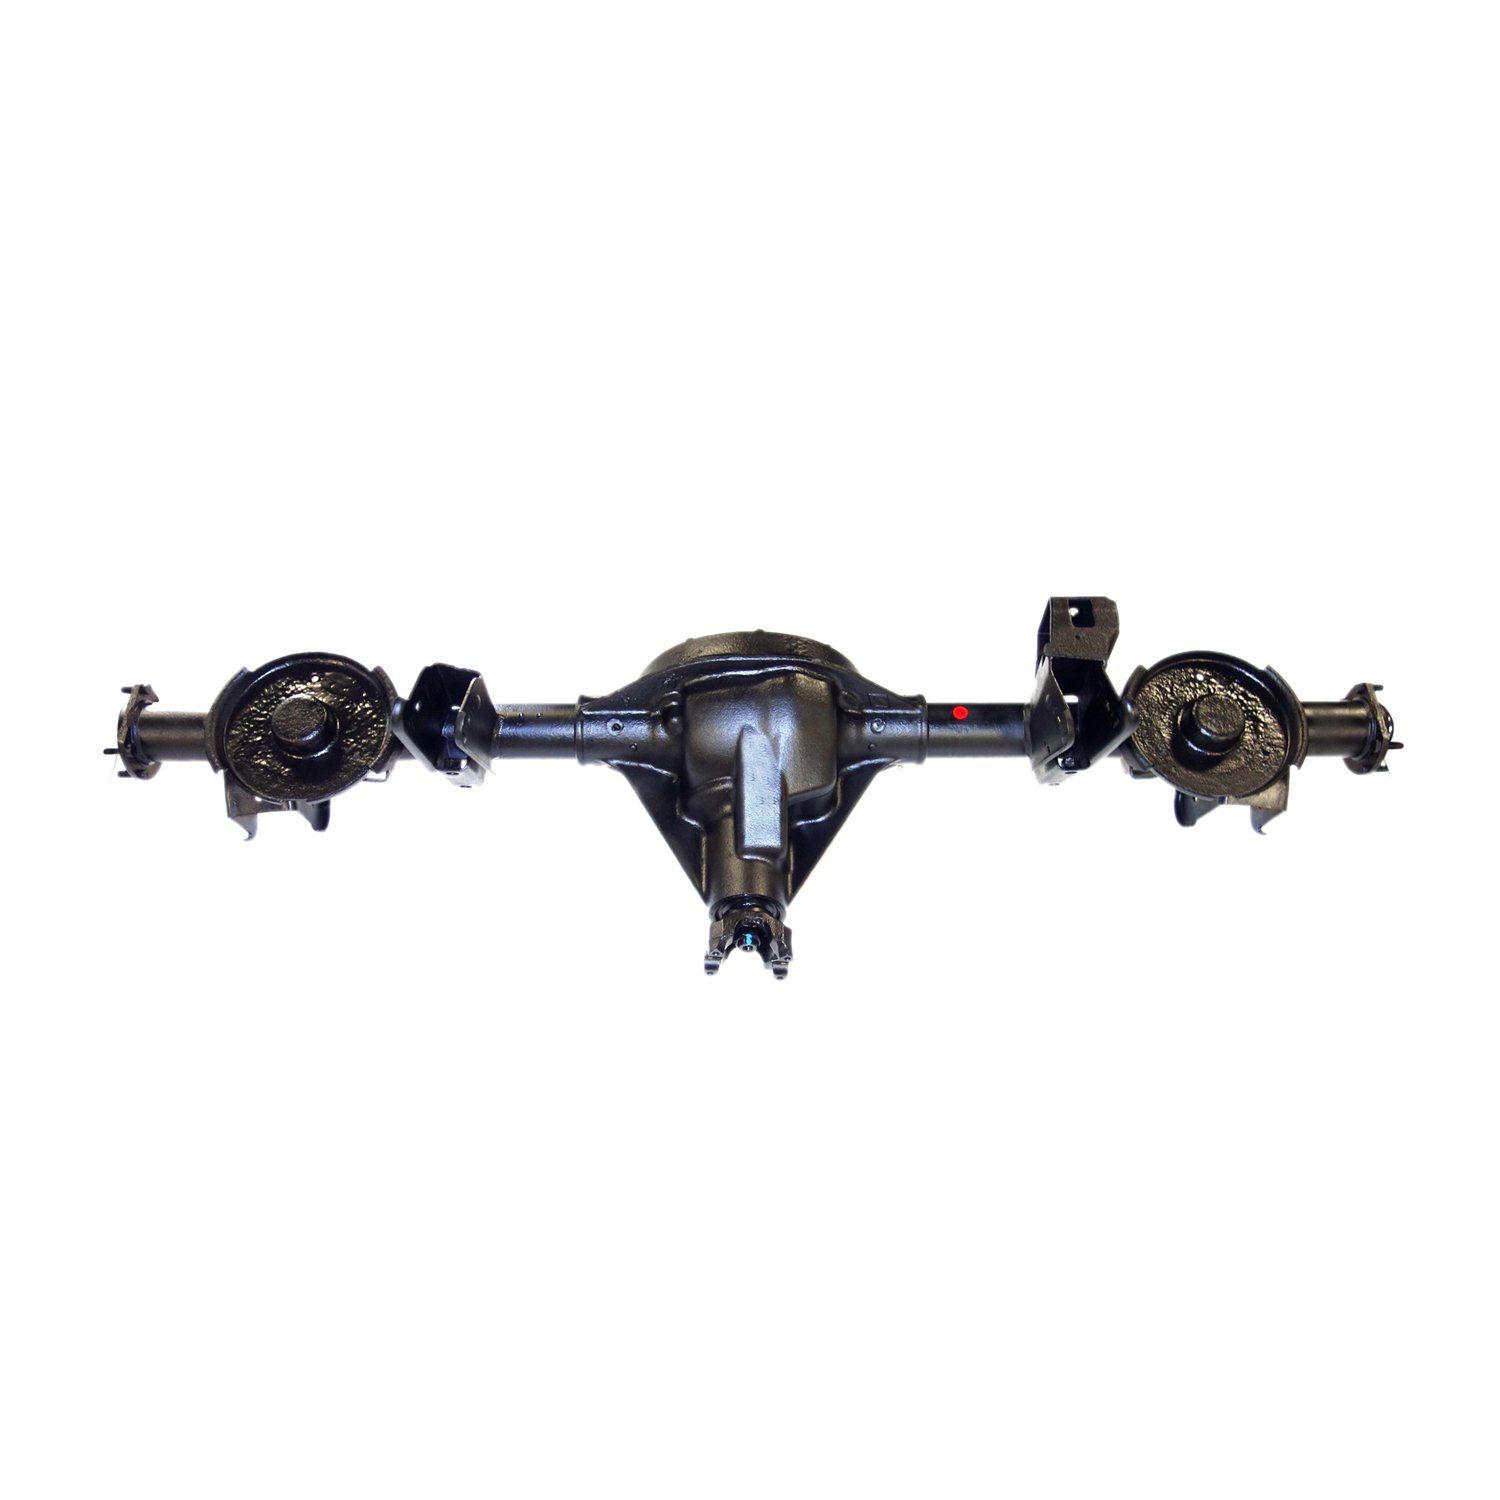 Remanufactured Complete Axle Assembly for Dana 35 90-95 Wrangler 3.73 w/o ABS, Posi LSD